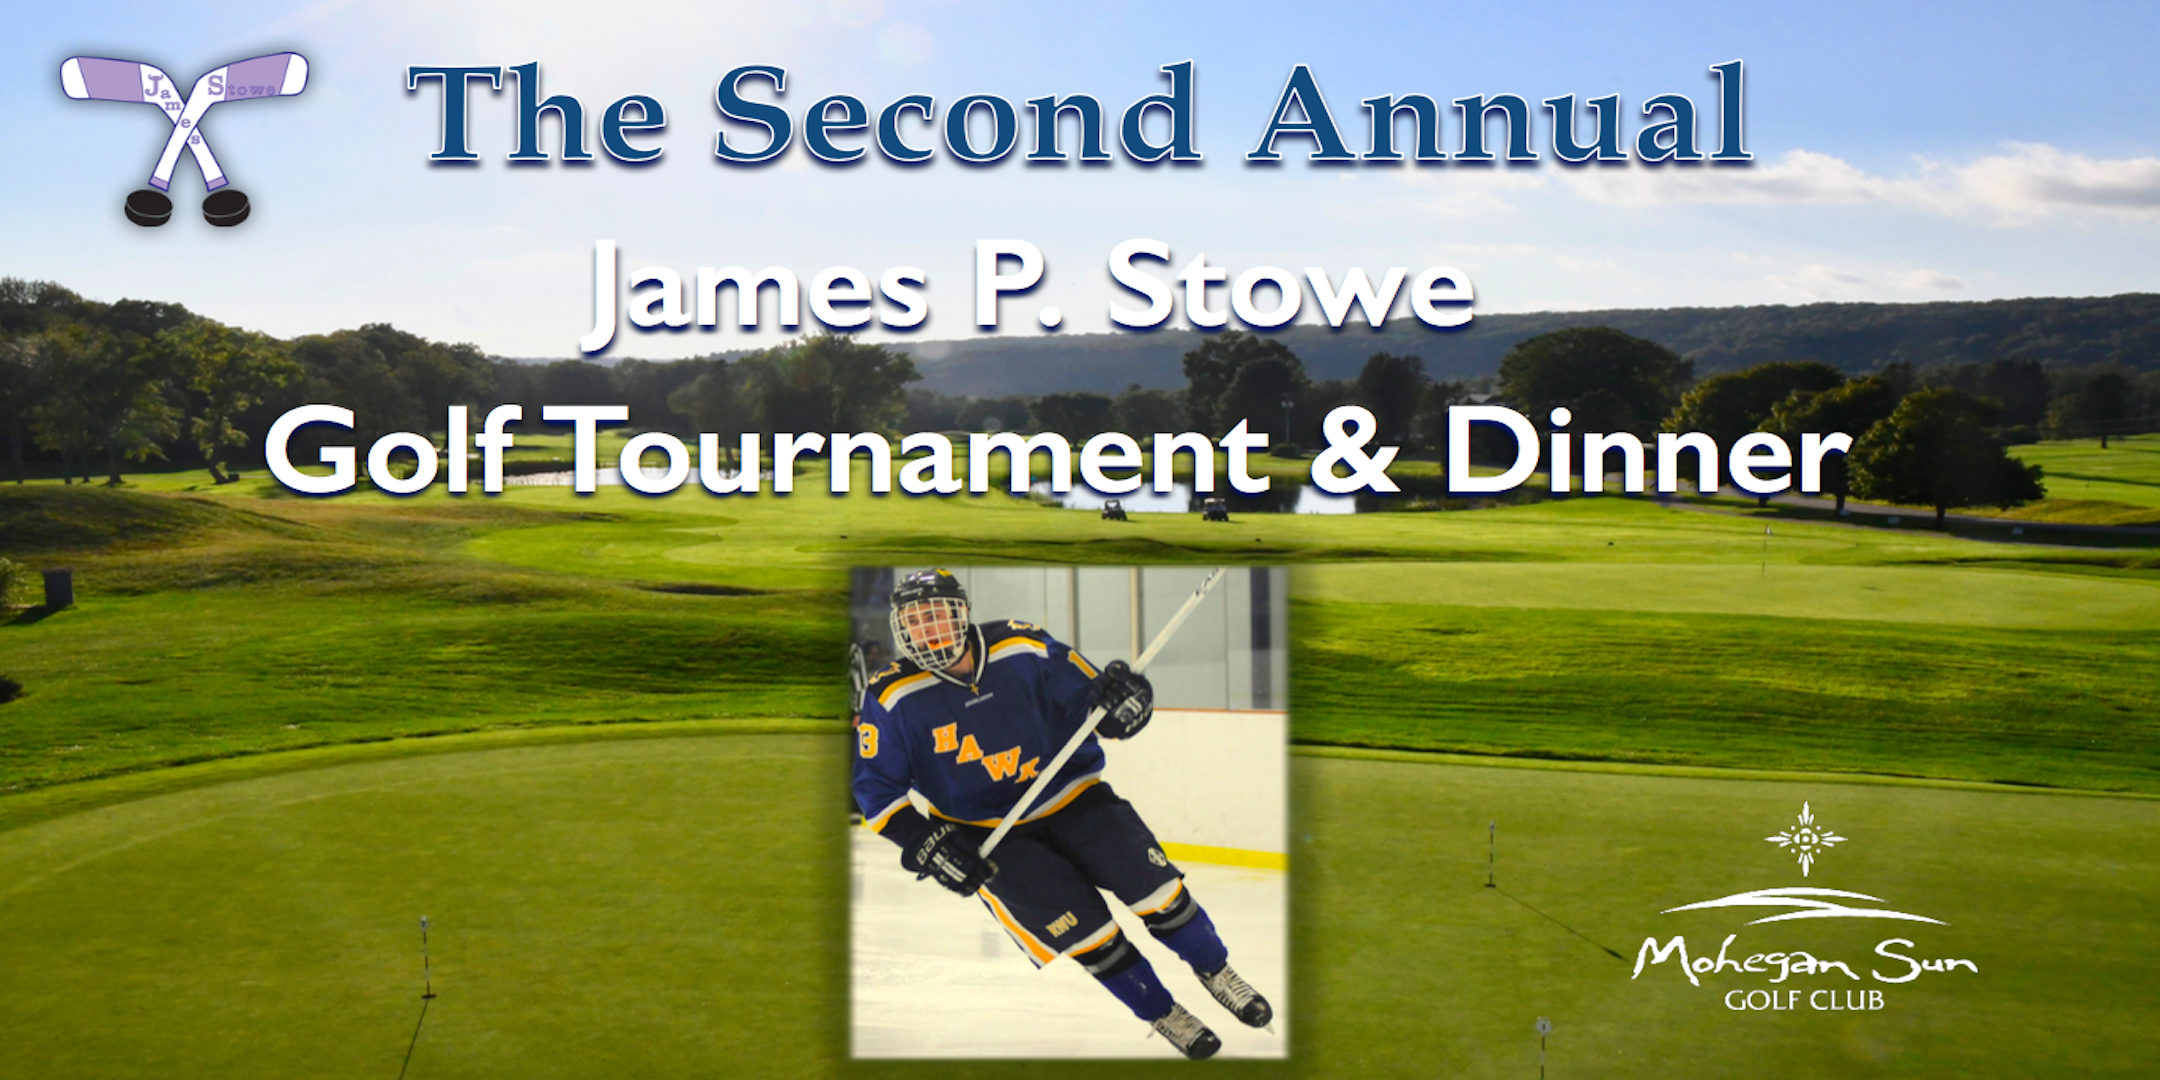 The Second Annual James P. Stowe Golf Tournament & Dinner